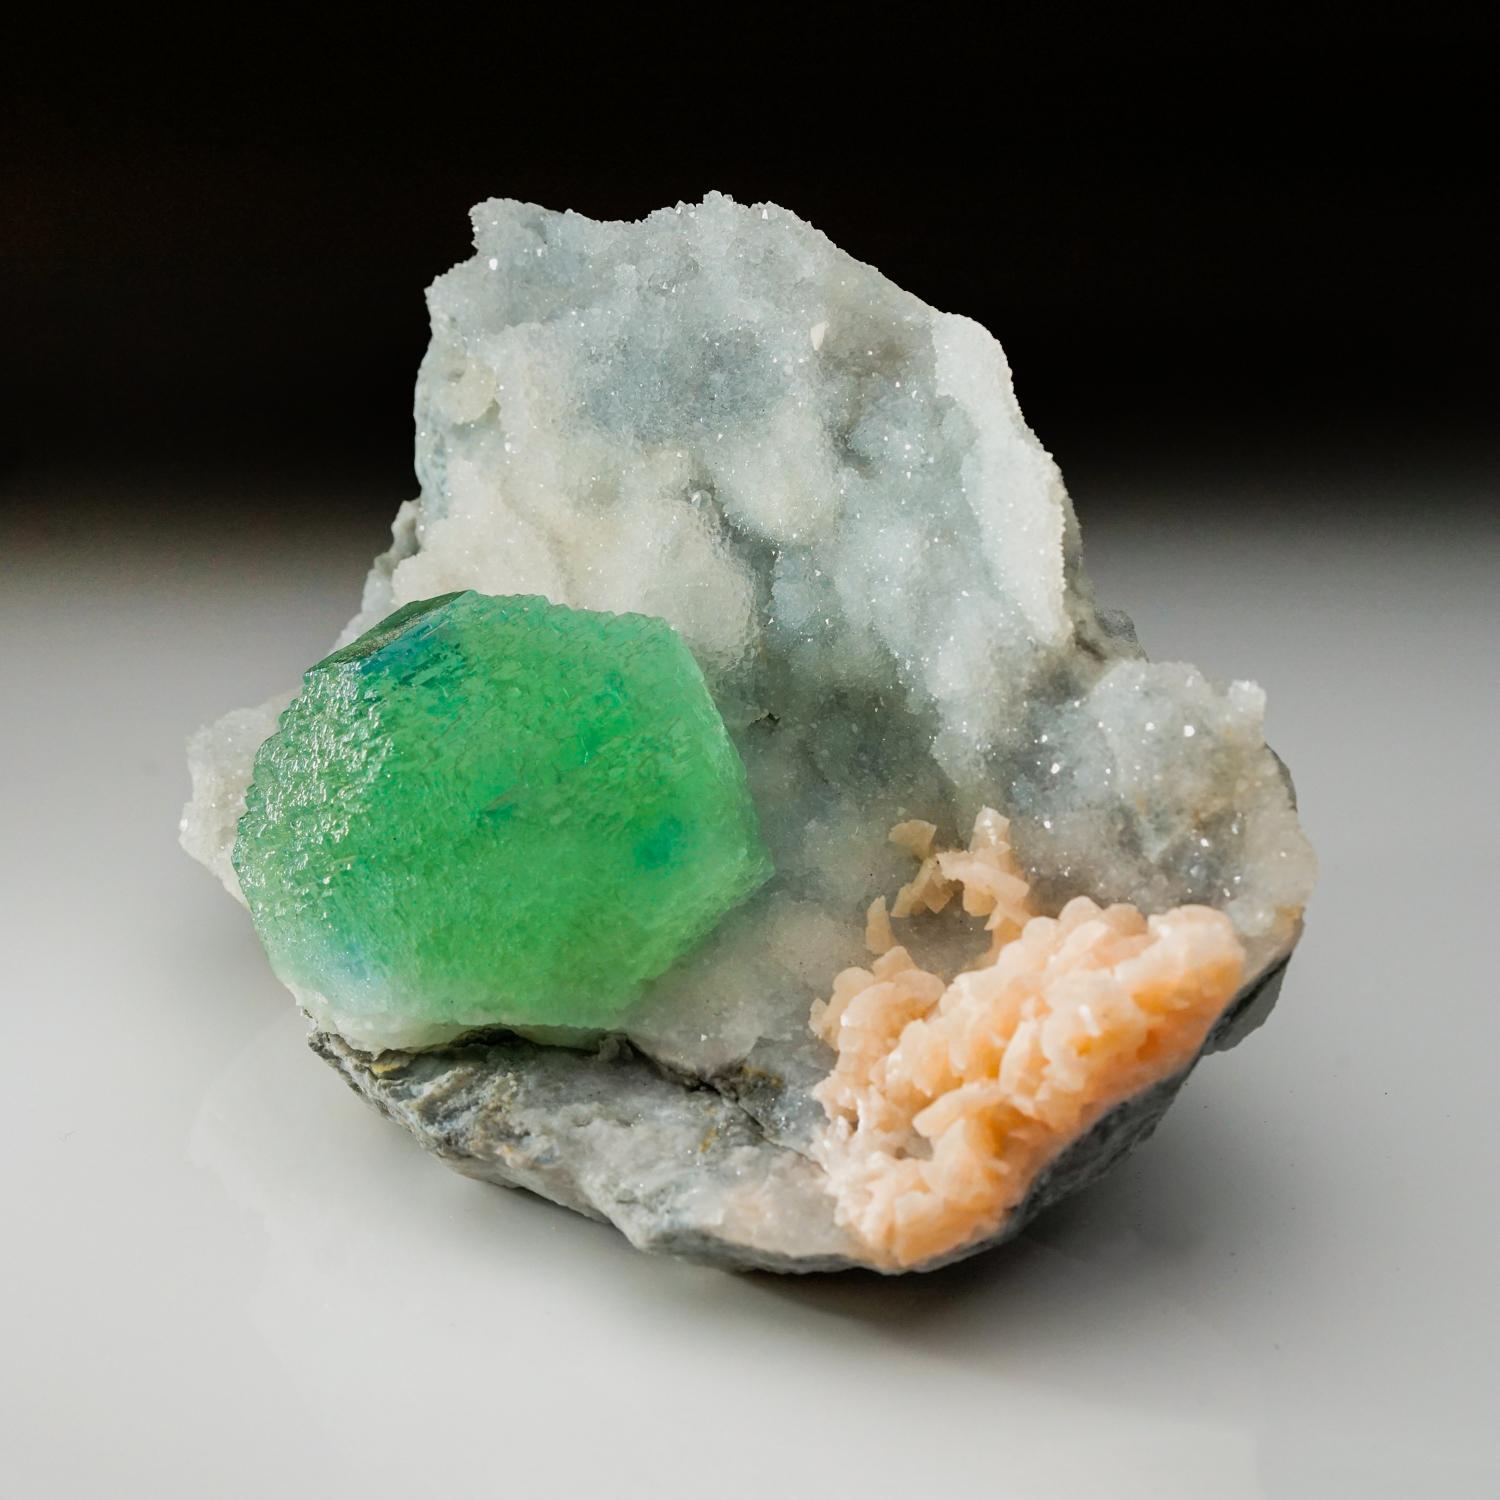 Chinese Green Fluorite on Quartz Matrix from from Ruyuan, Lechang, Guandong, China (2.5  For Sale